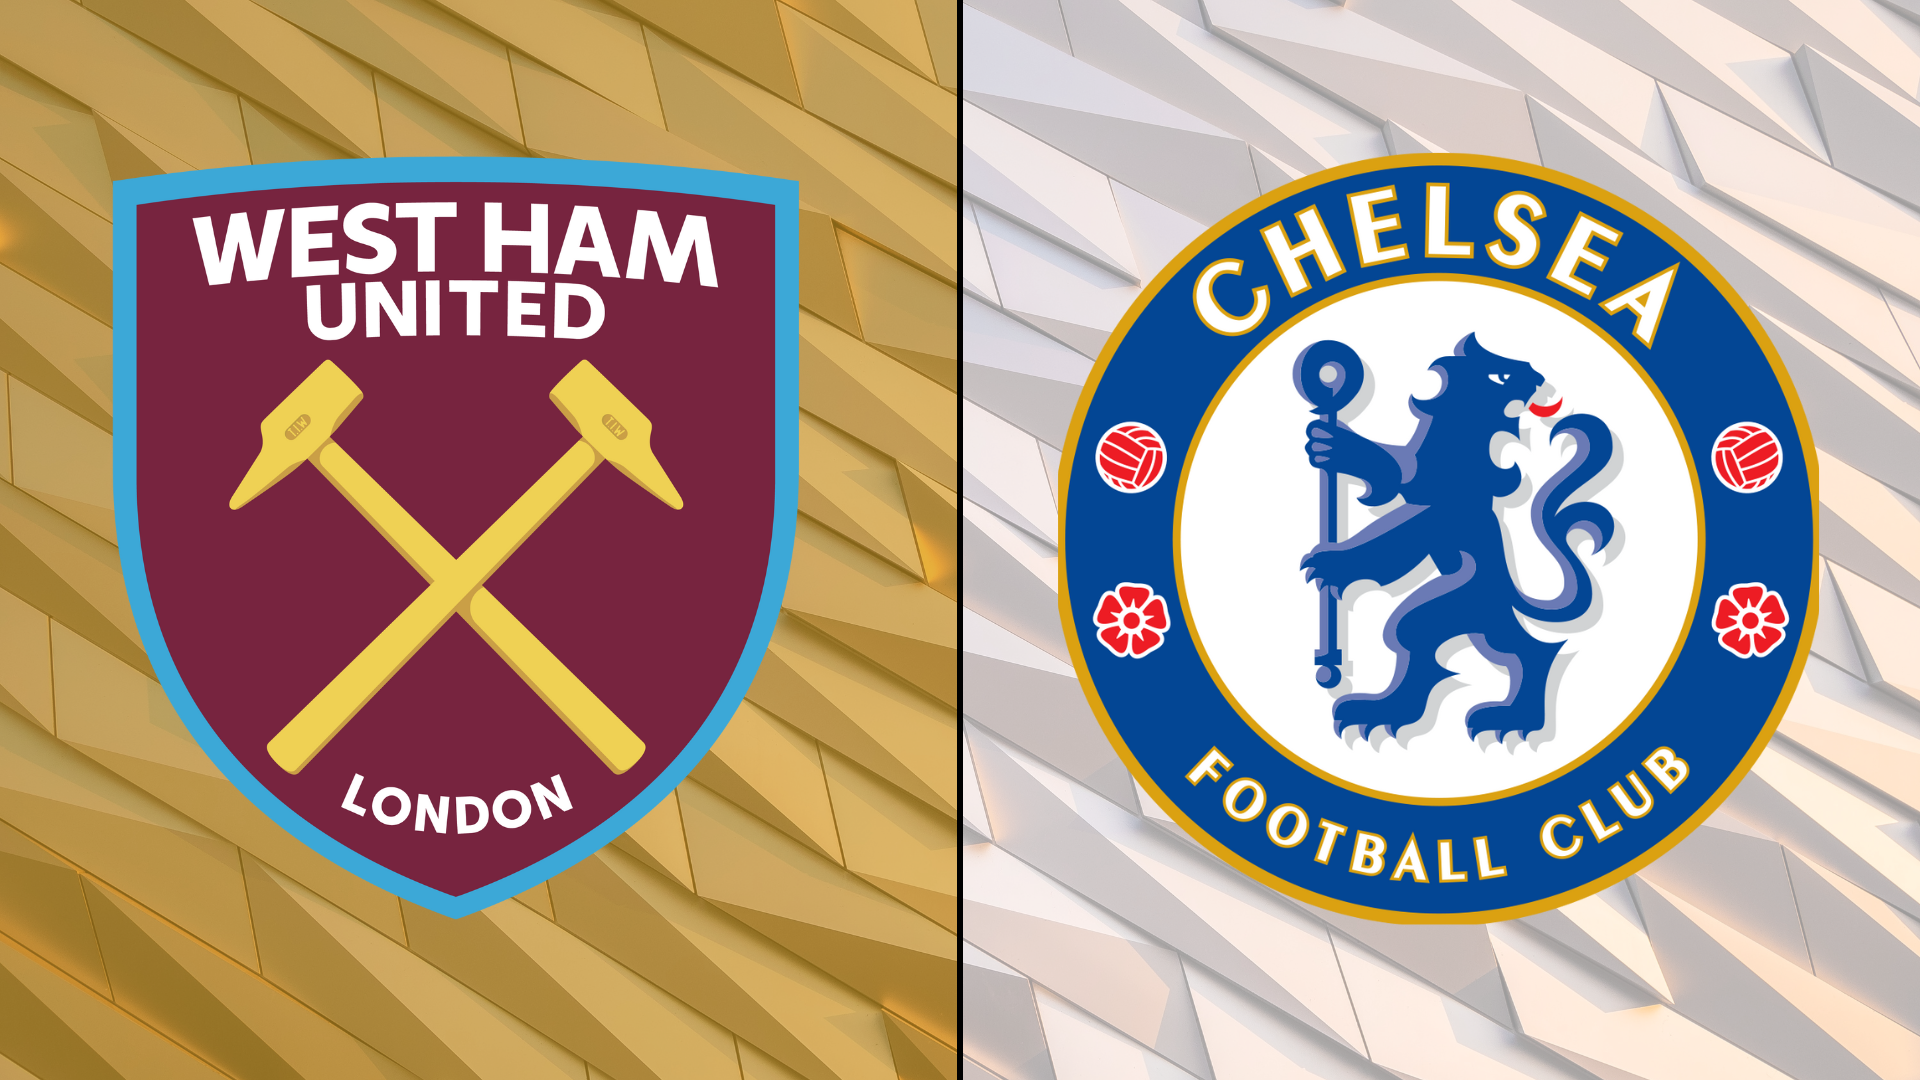 West Ham vs Chelsea Where to watch the match online, live stream, TV channels, and kick-off time Goal US